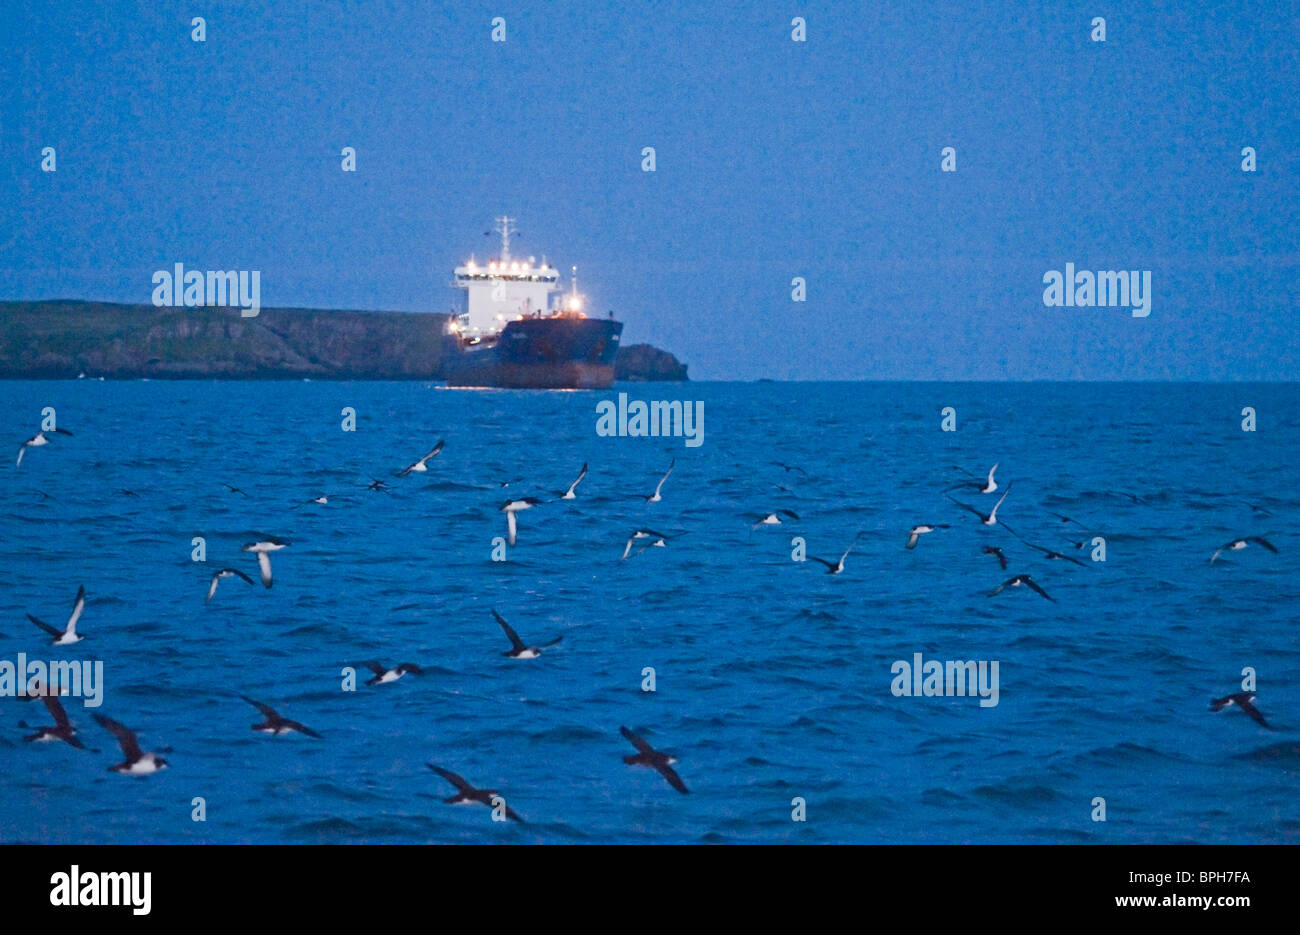 Manx Shearwaters Puffinus puffinus gathering in St Bride's Bay off Skomer Island Pembrokeshire Wales at dusk July Stock Photo